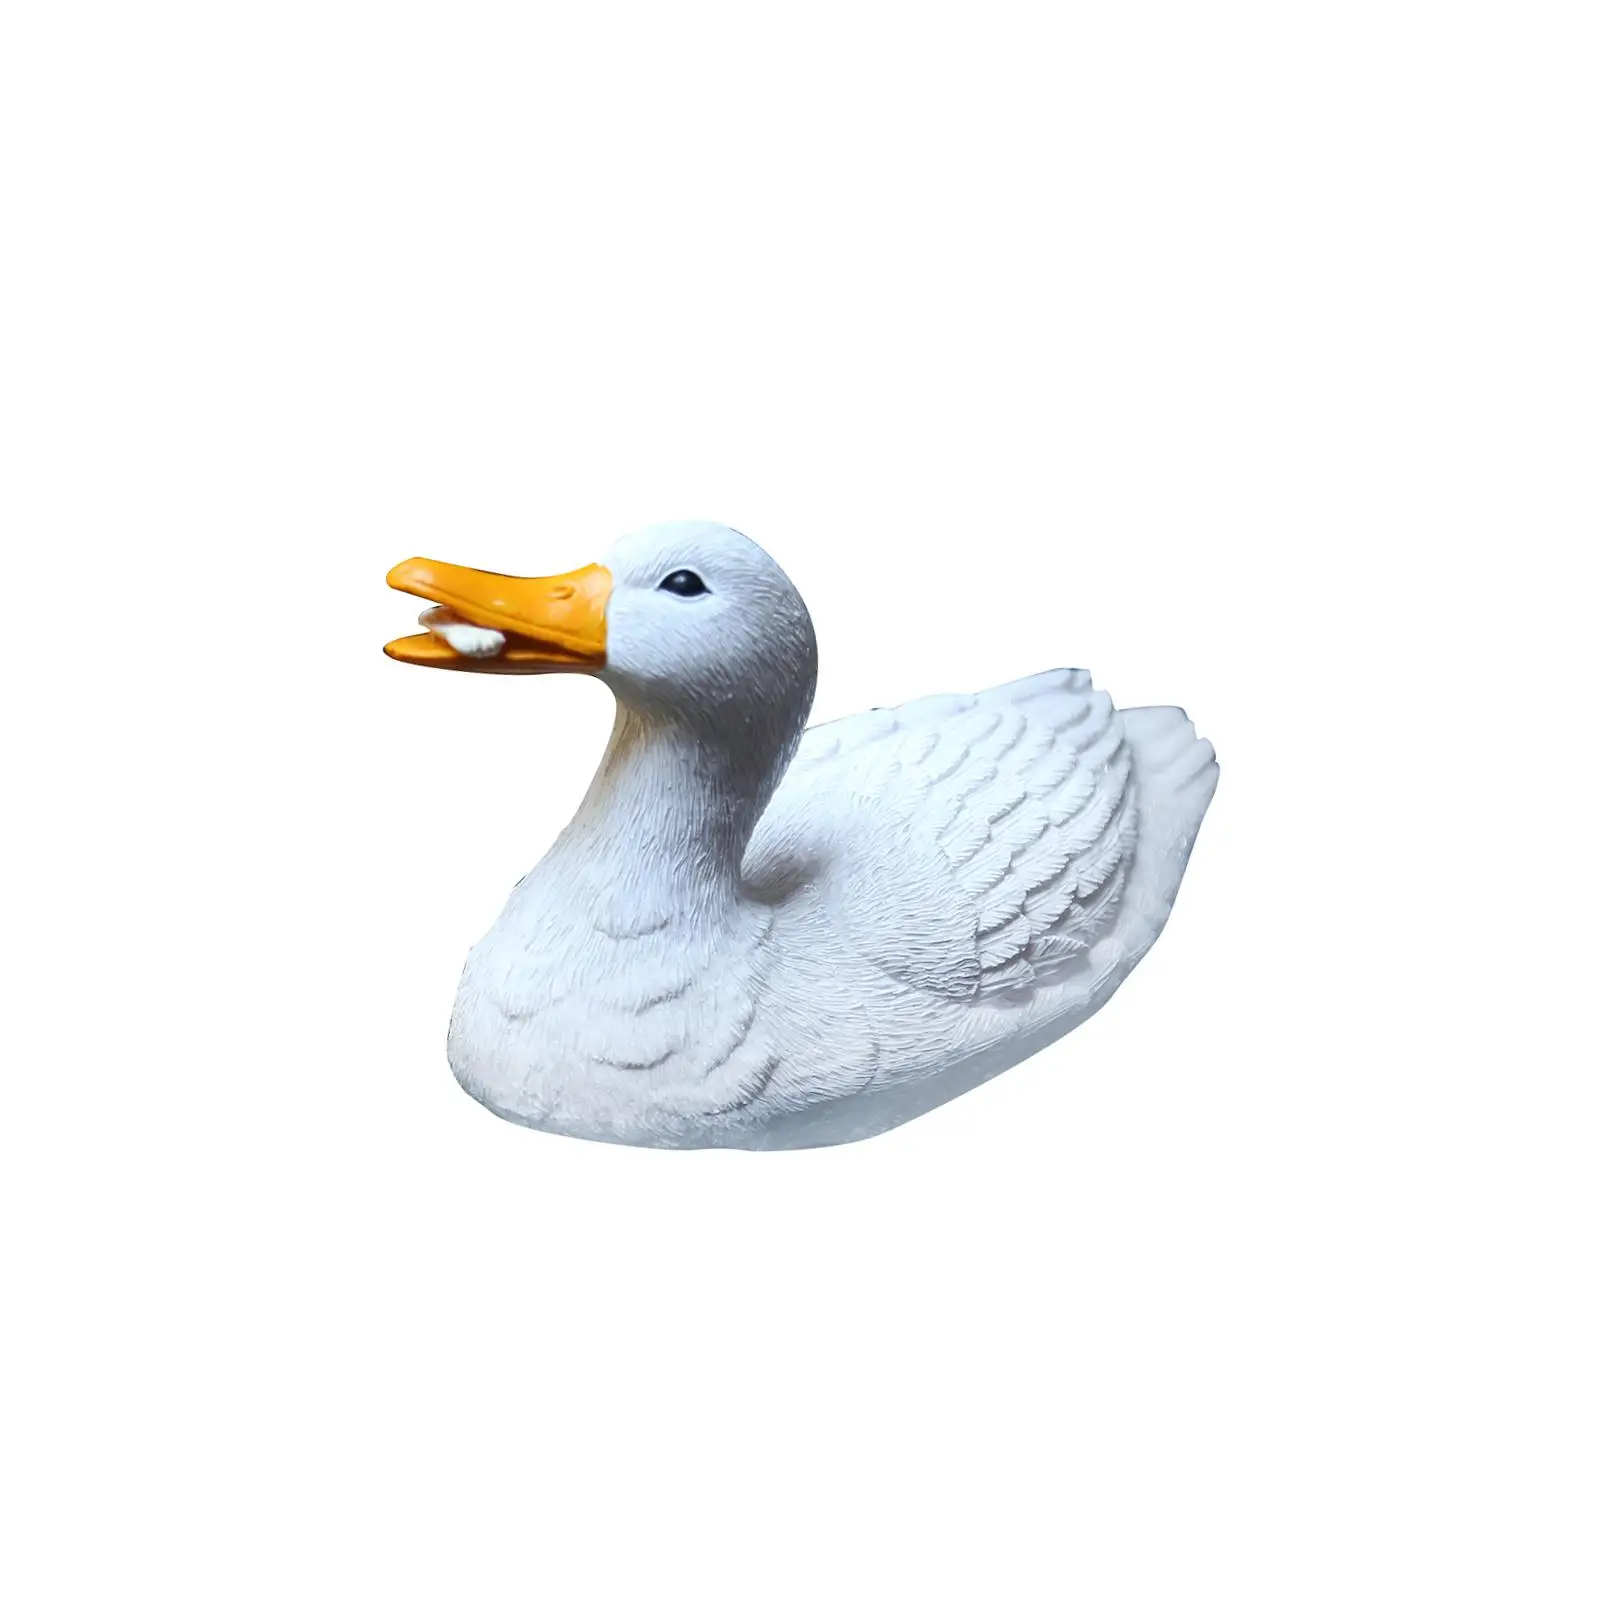 Simulation Floating Duck Ornaments Garden Statue Prop Lifelike Resin DIY Accessories Animal Figurines for Landscape Office Table